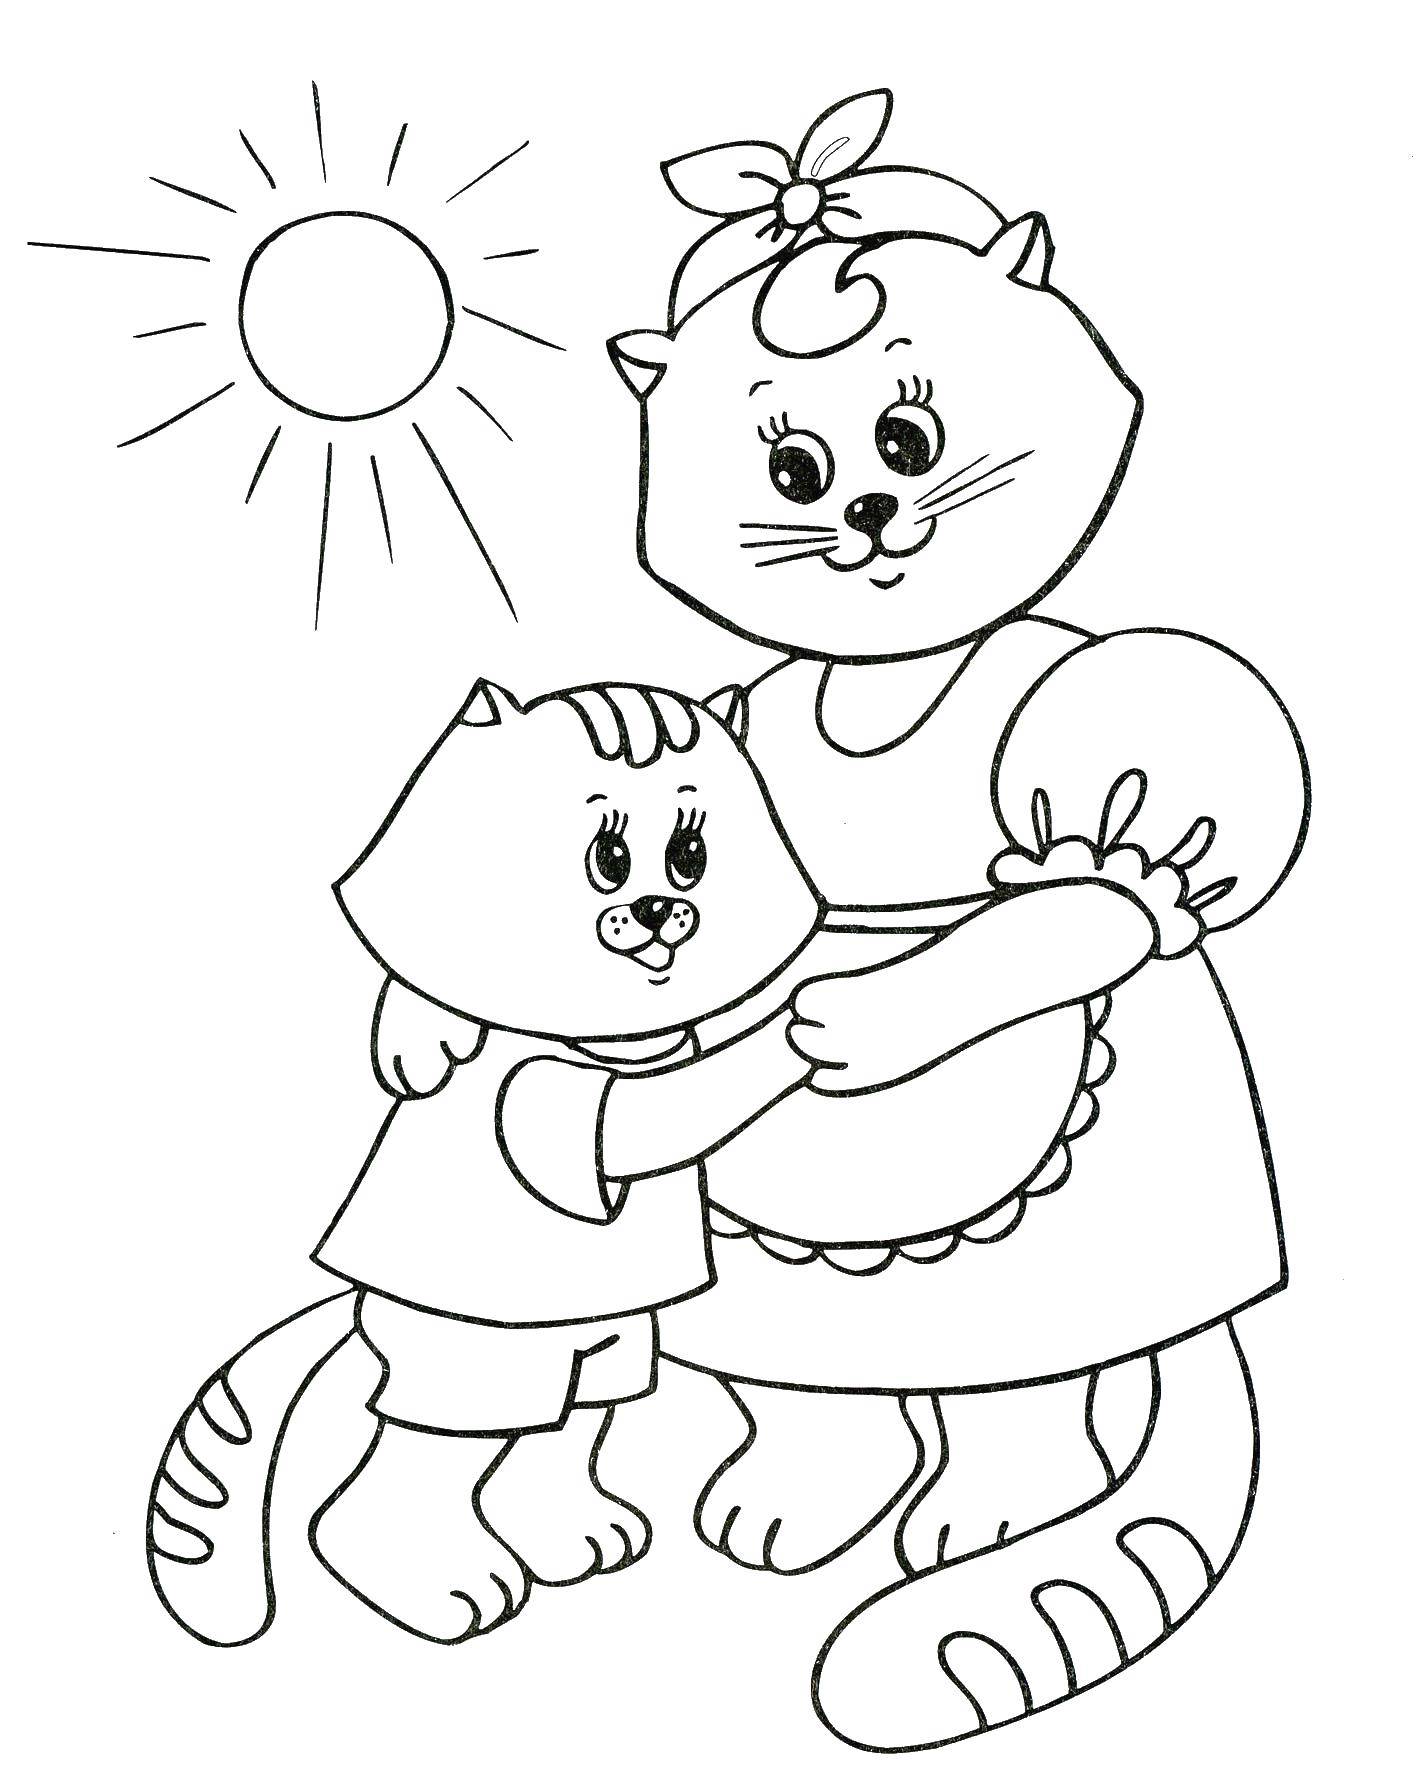 Coloring Mother cat with baby kitten. Category mother and child. Tags:  cat, kitten, sun, apron.